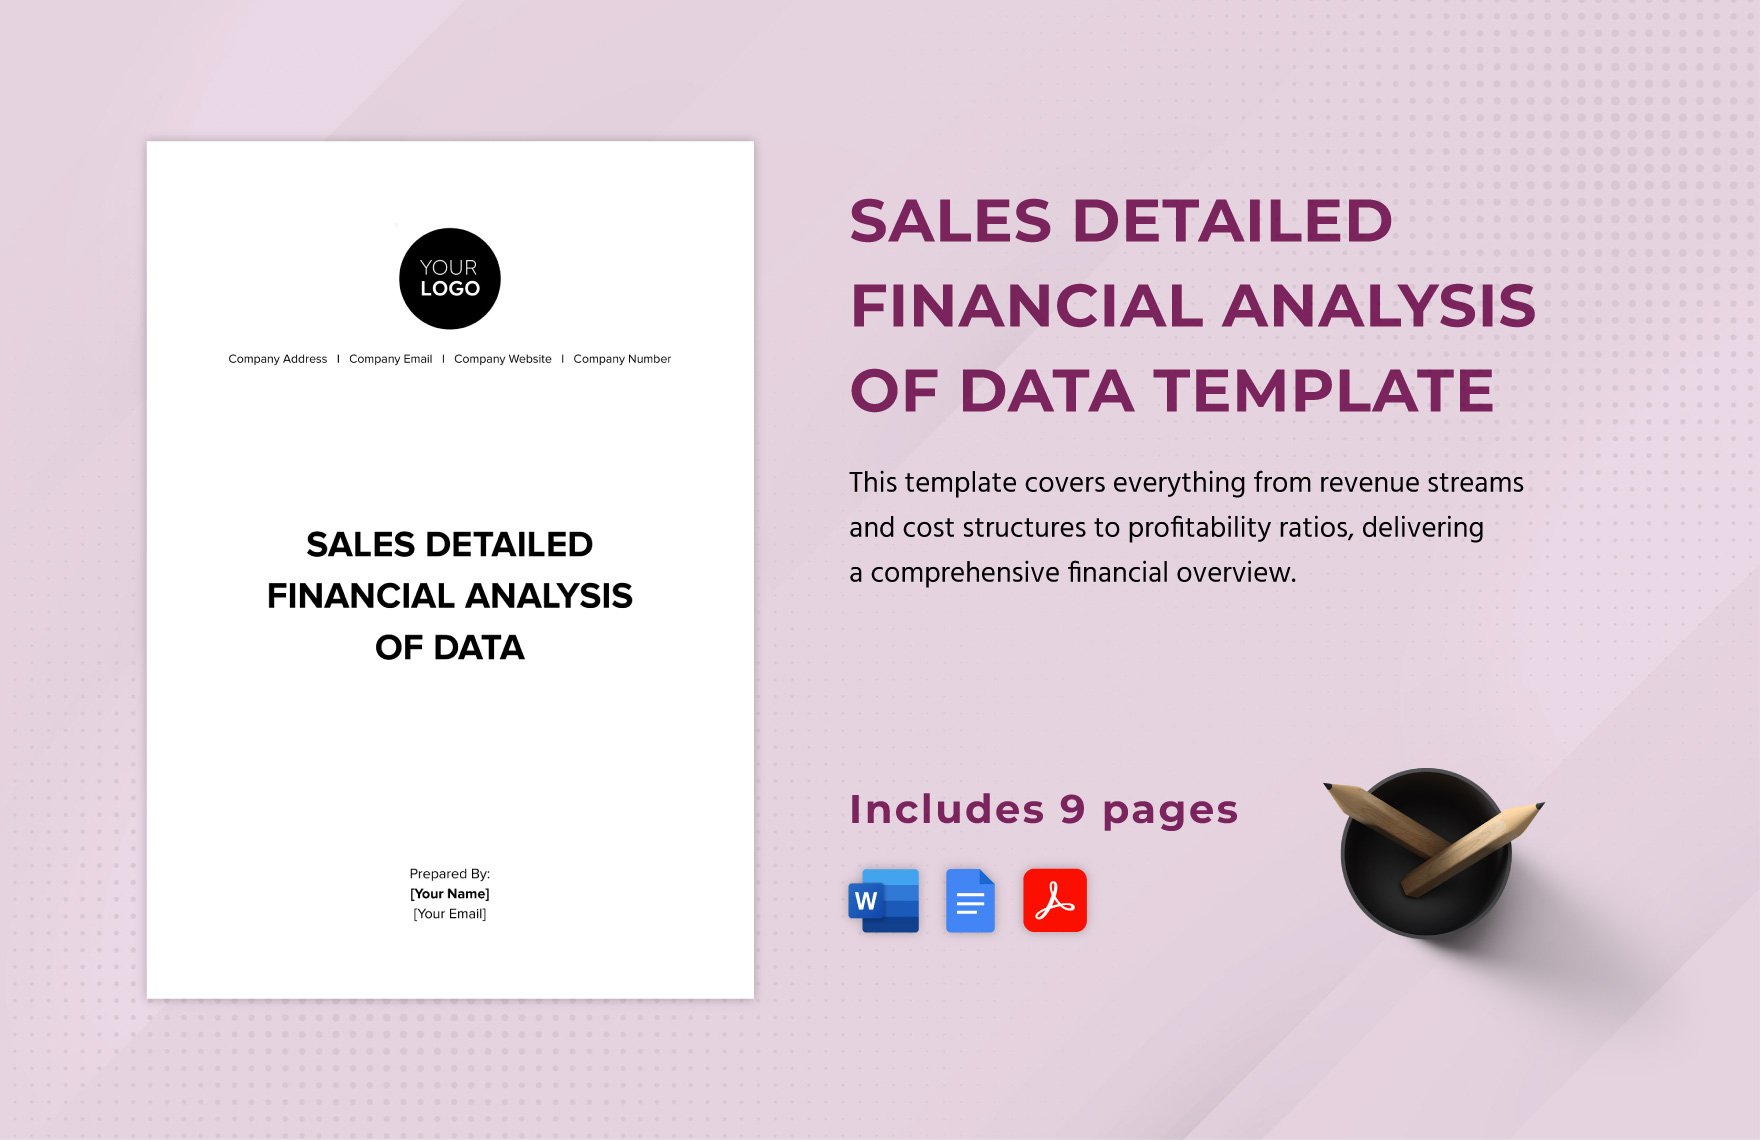 Sales Detailed Financial Analysis of Data Template